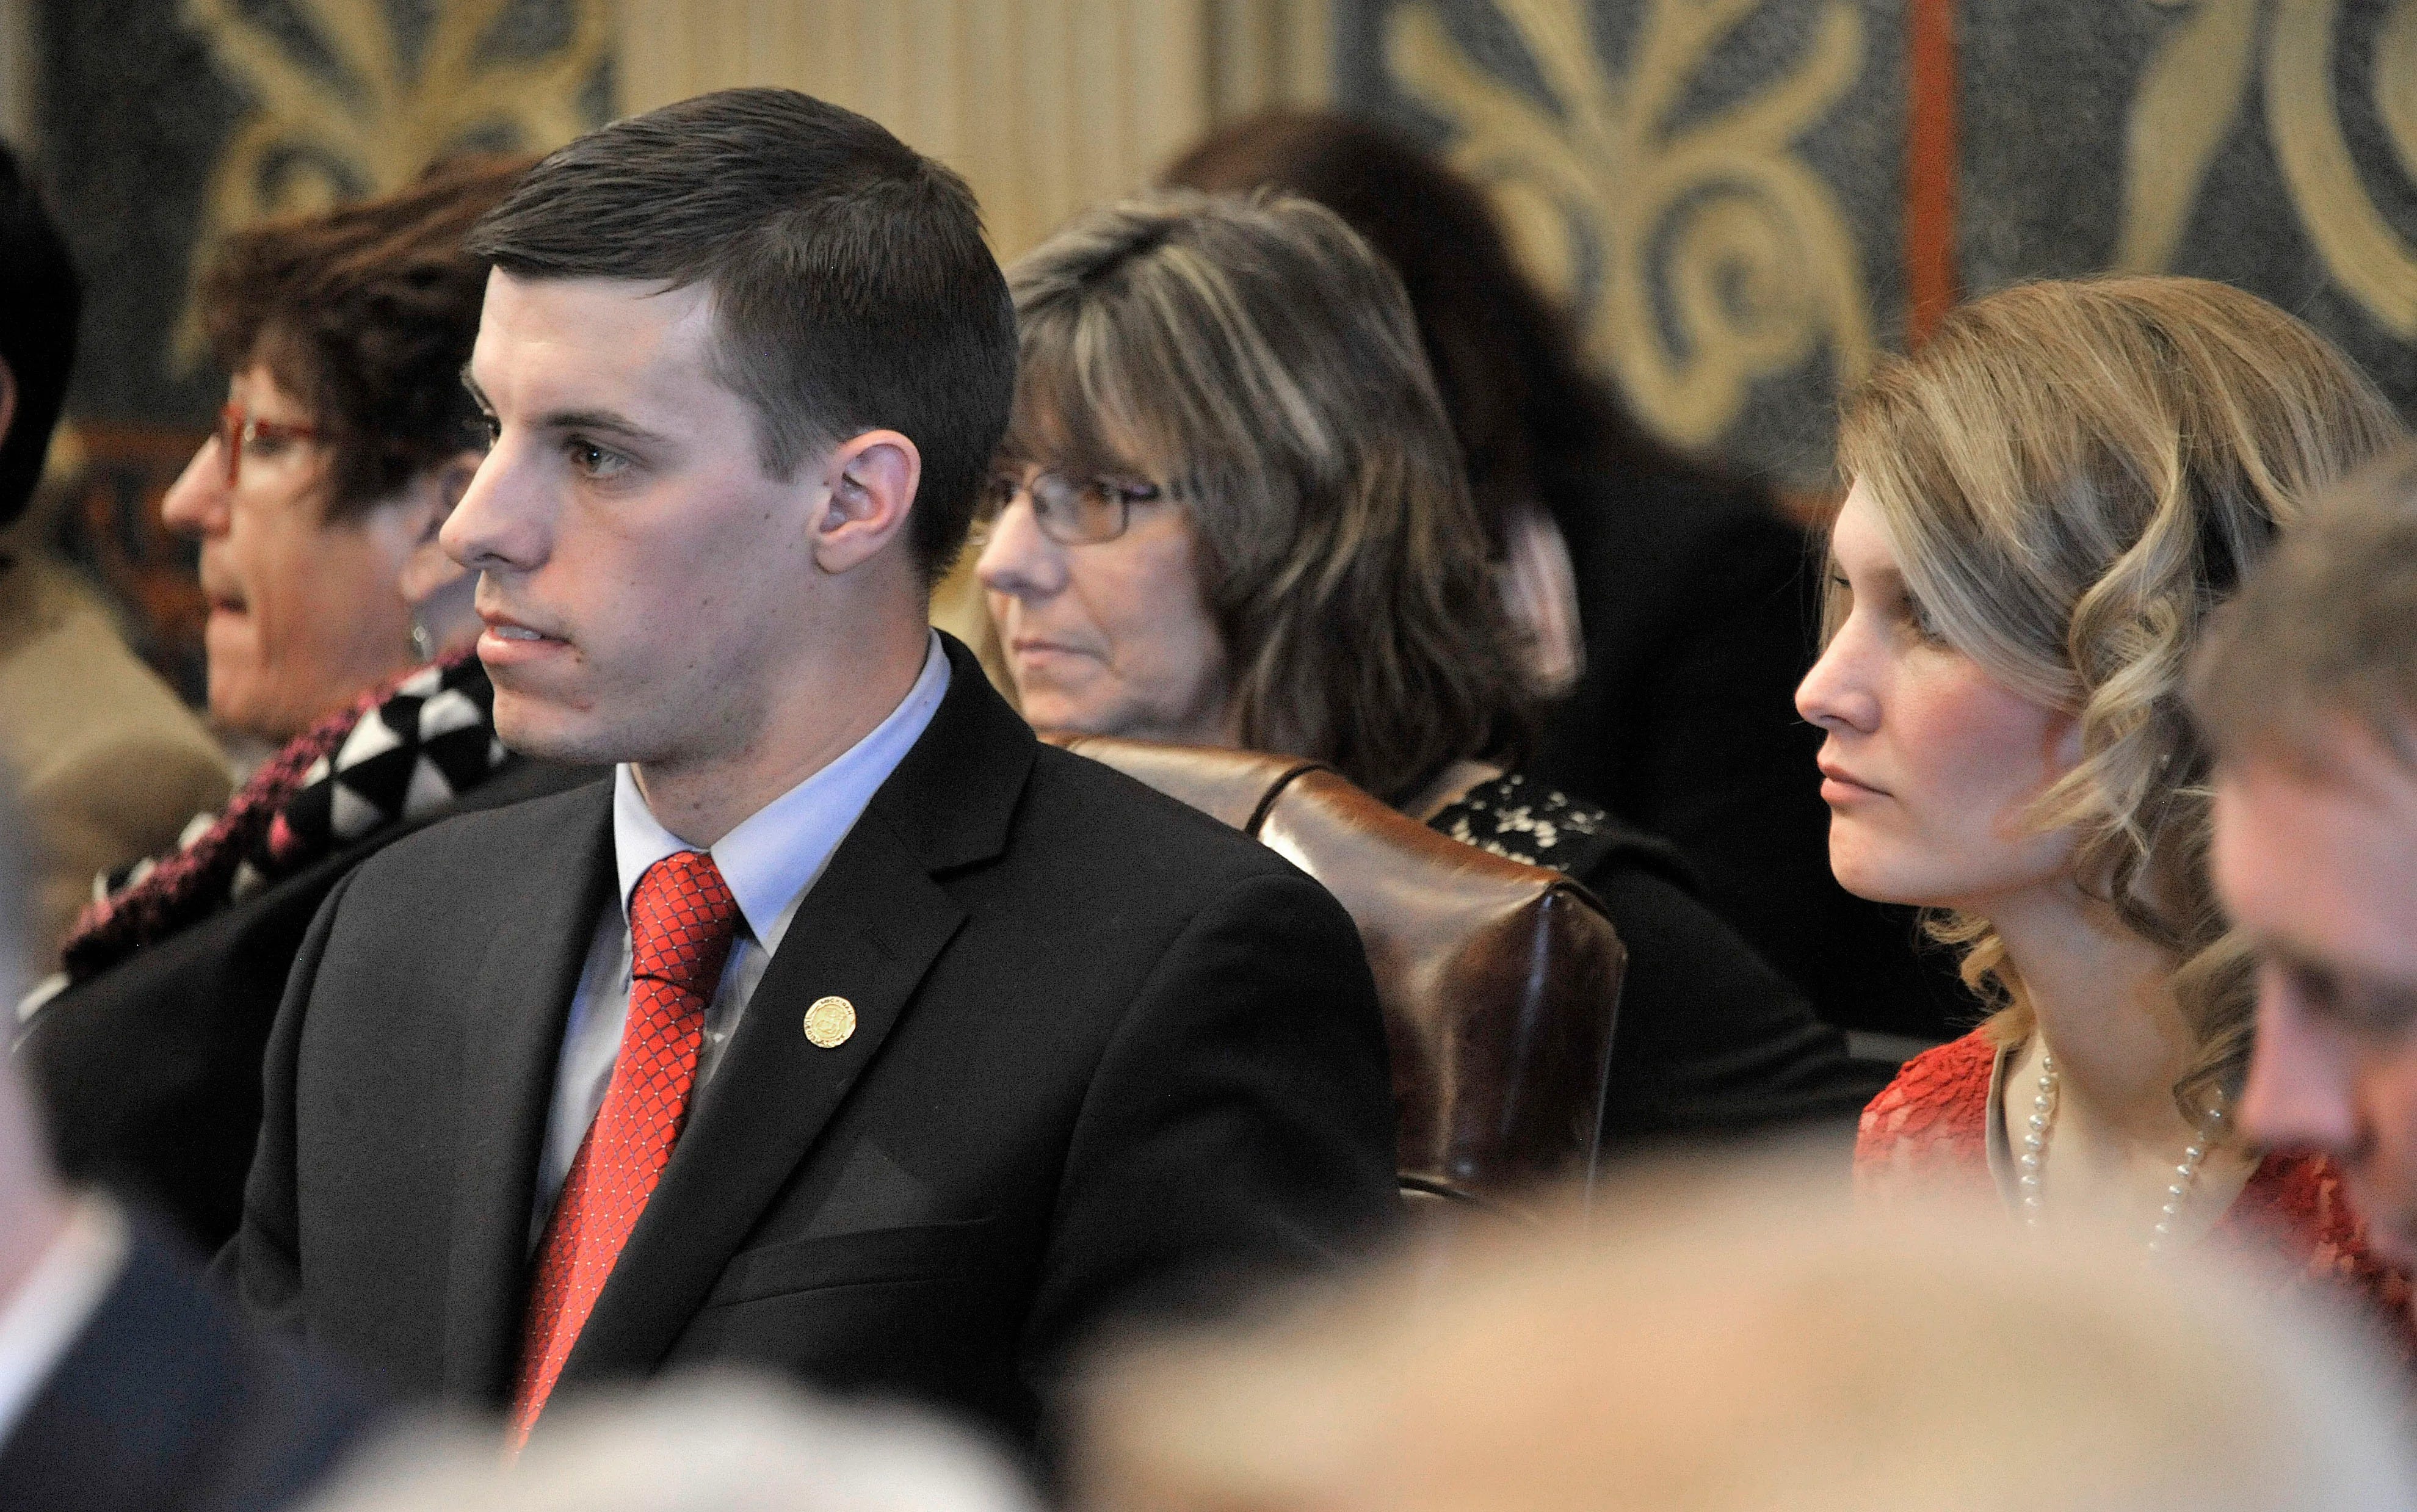 Then-state Rep. Lee Chatfield, R-Levering, sits with his wife, Stephanie, far right, after taking his oath of office in 2015.